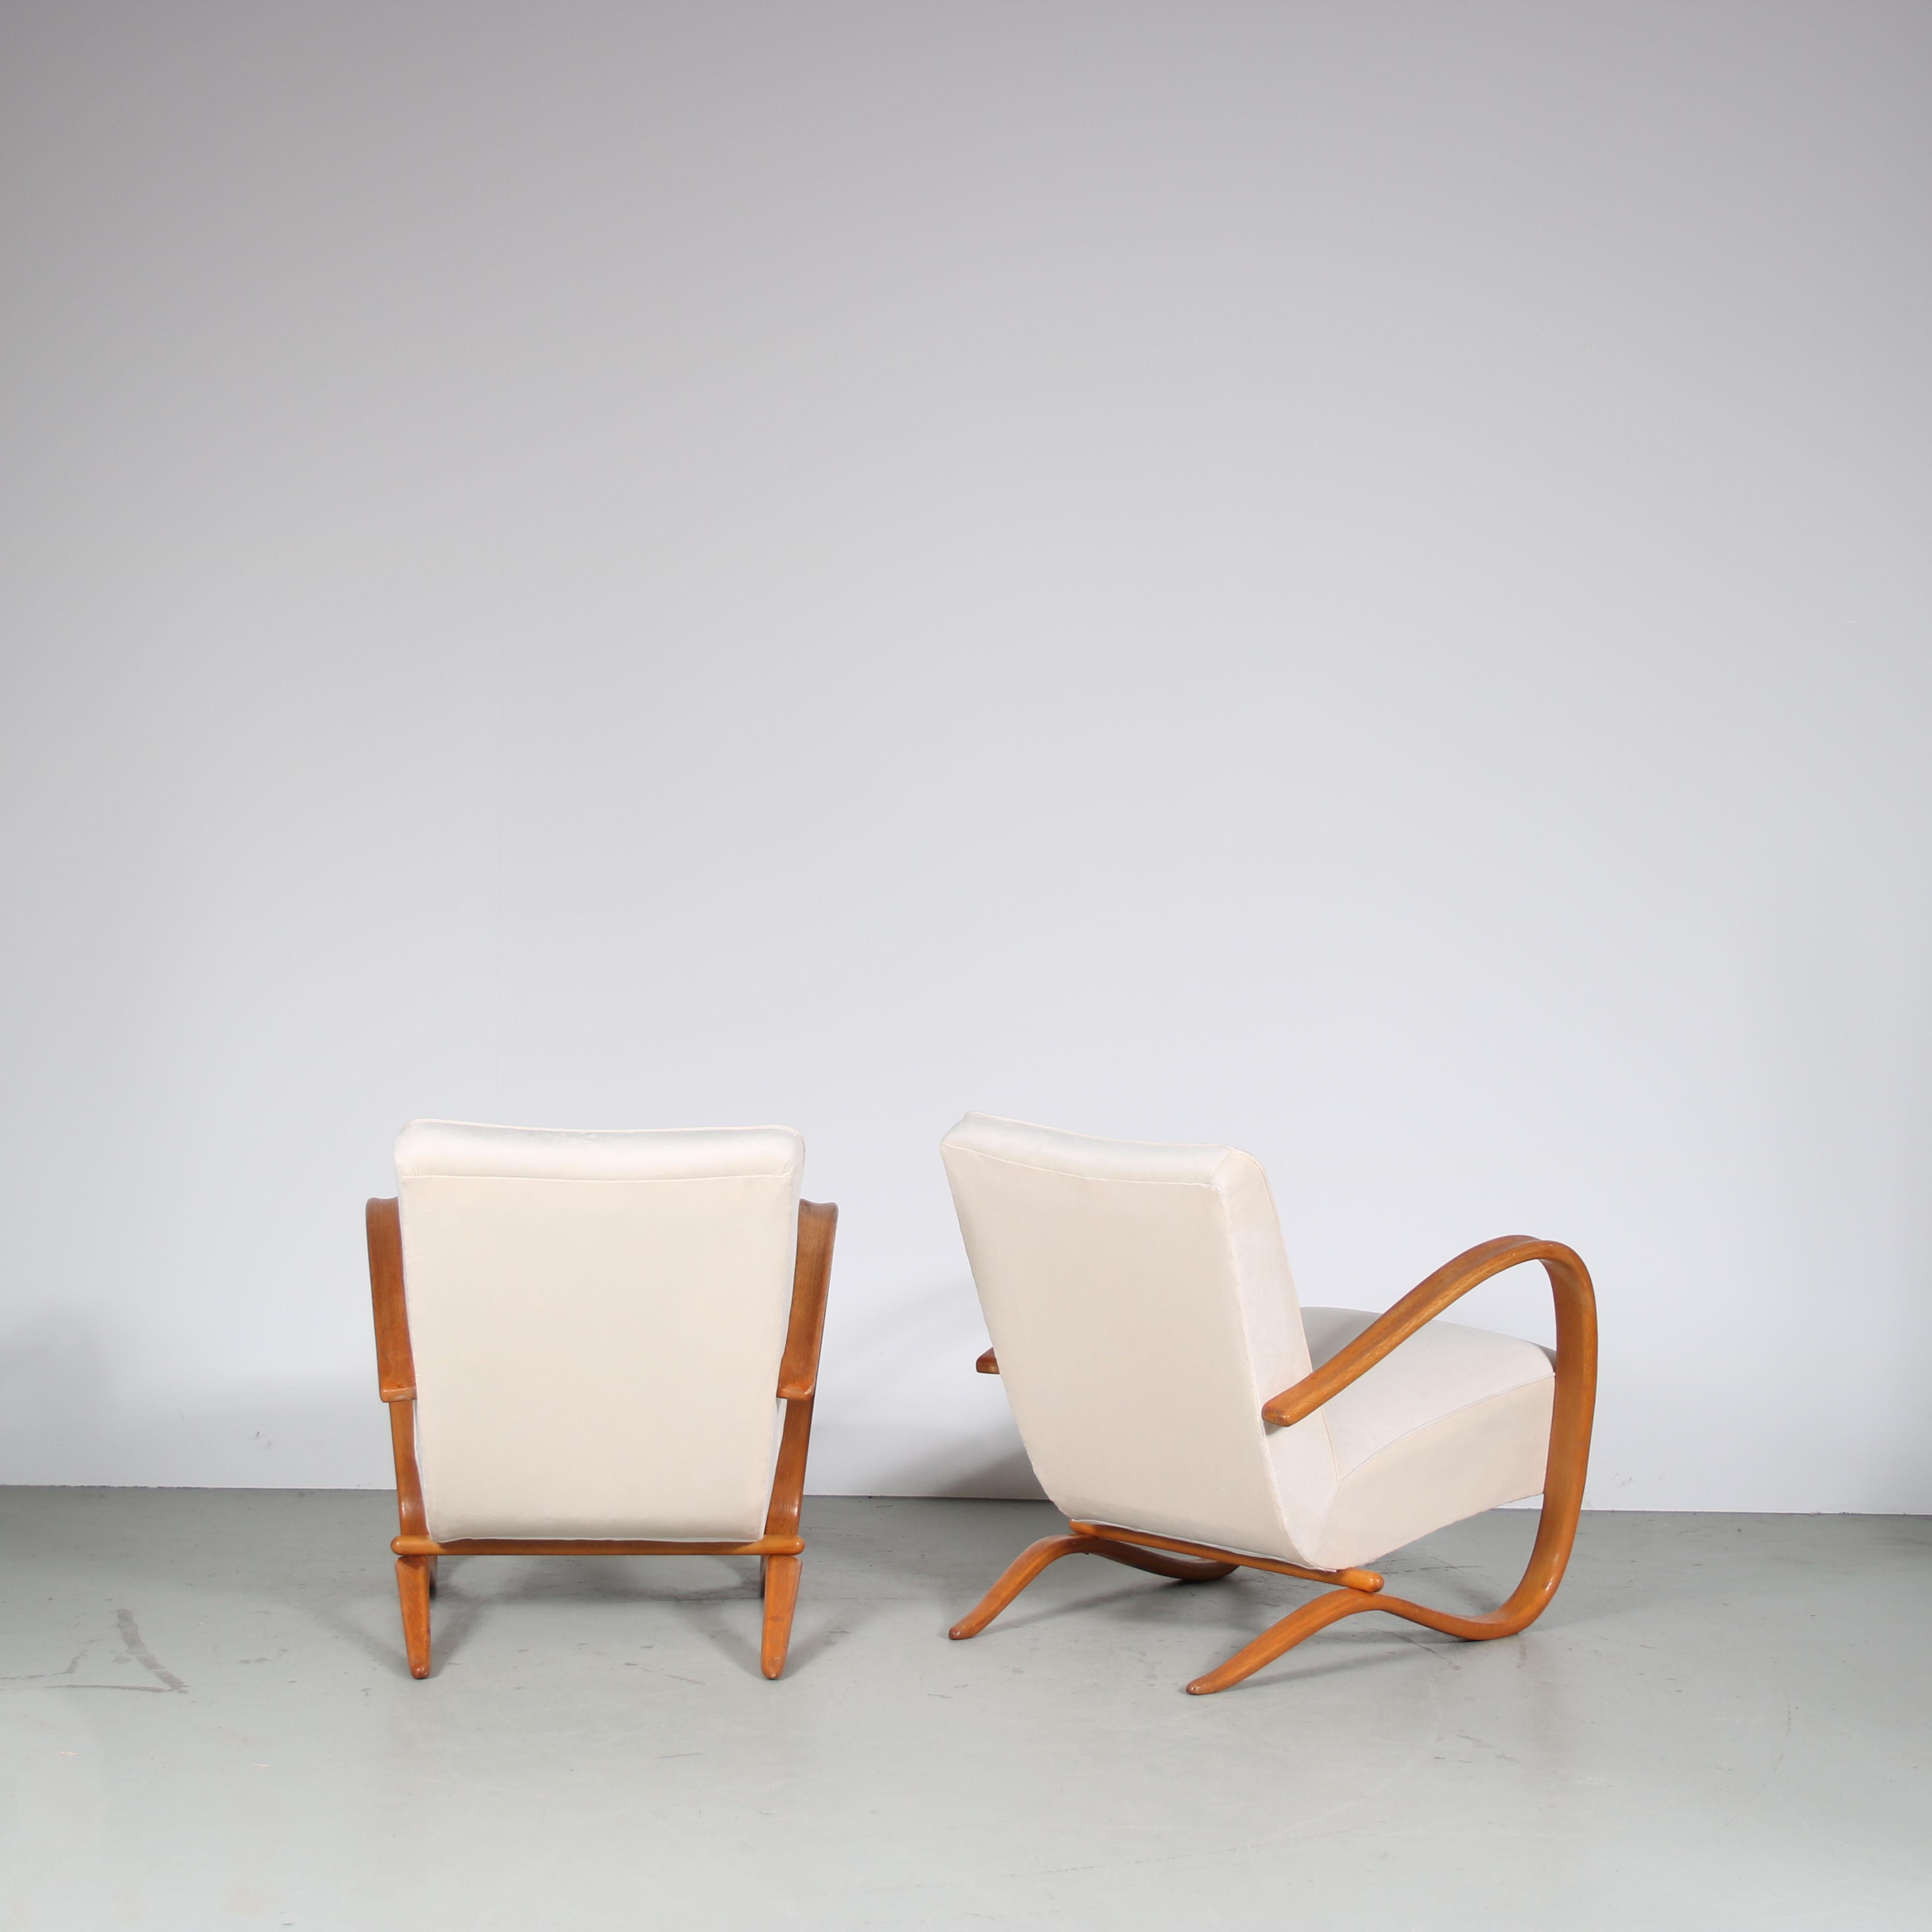 Fabric Pair of Jindrich Halabala Chairs for Up Zadovy, Czech 1950 For Sale